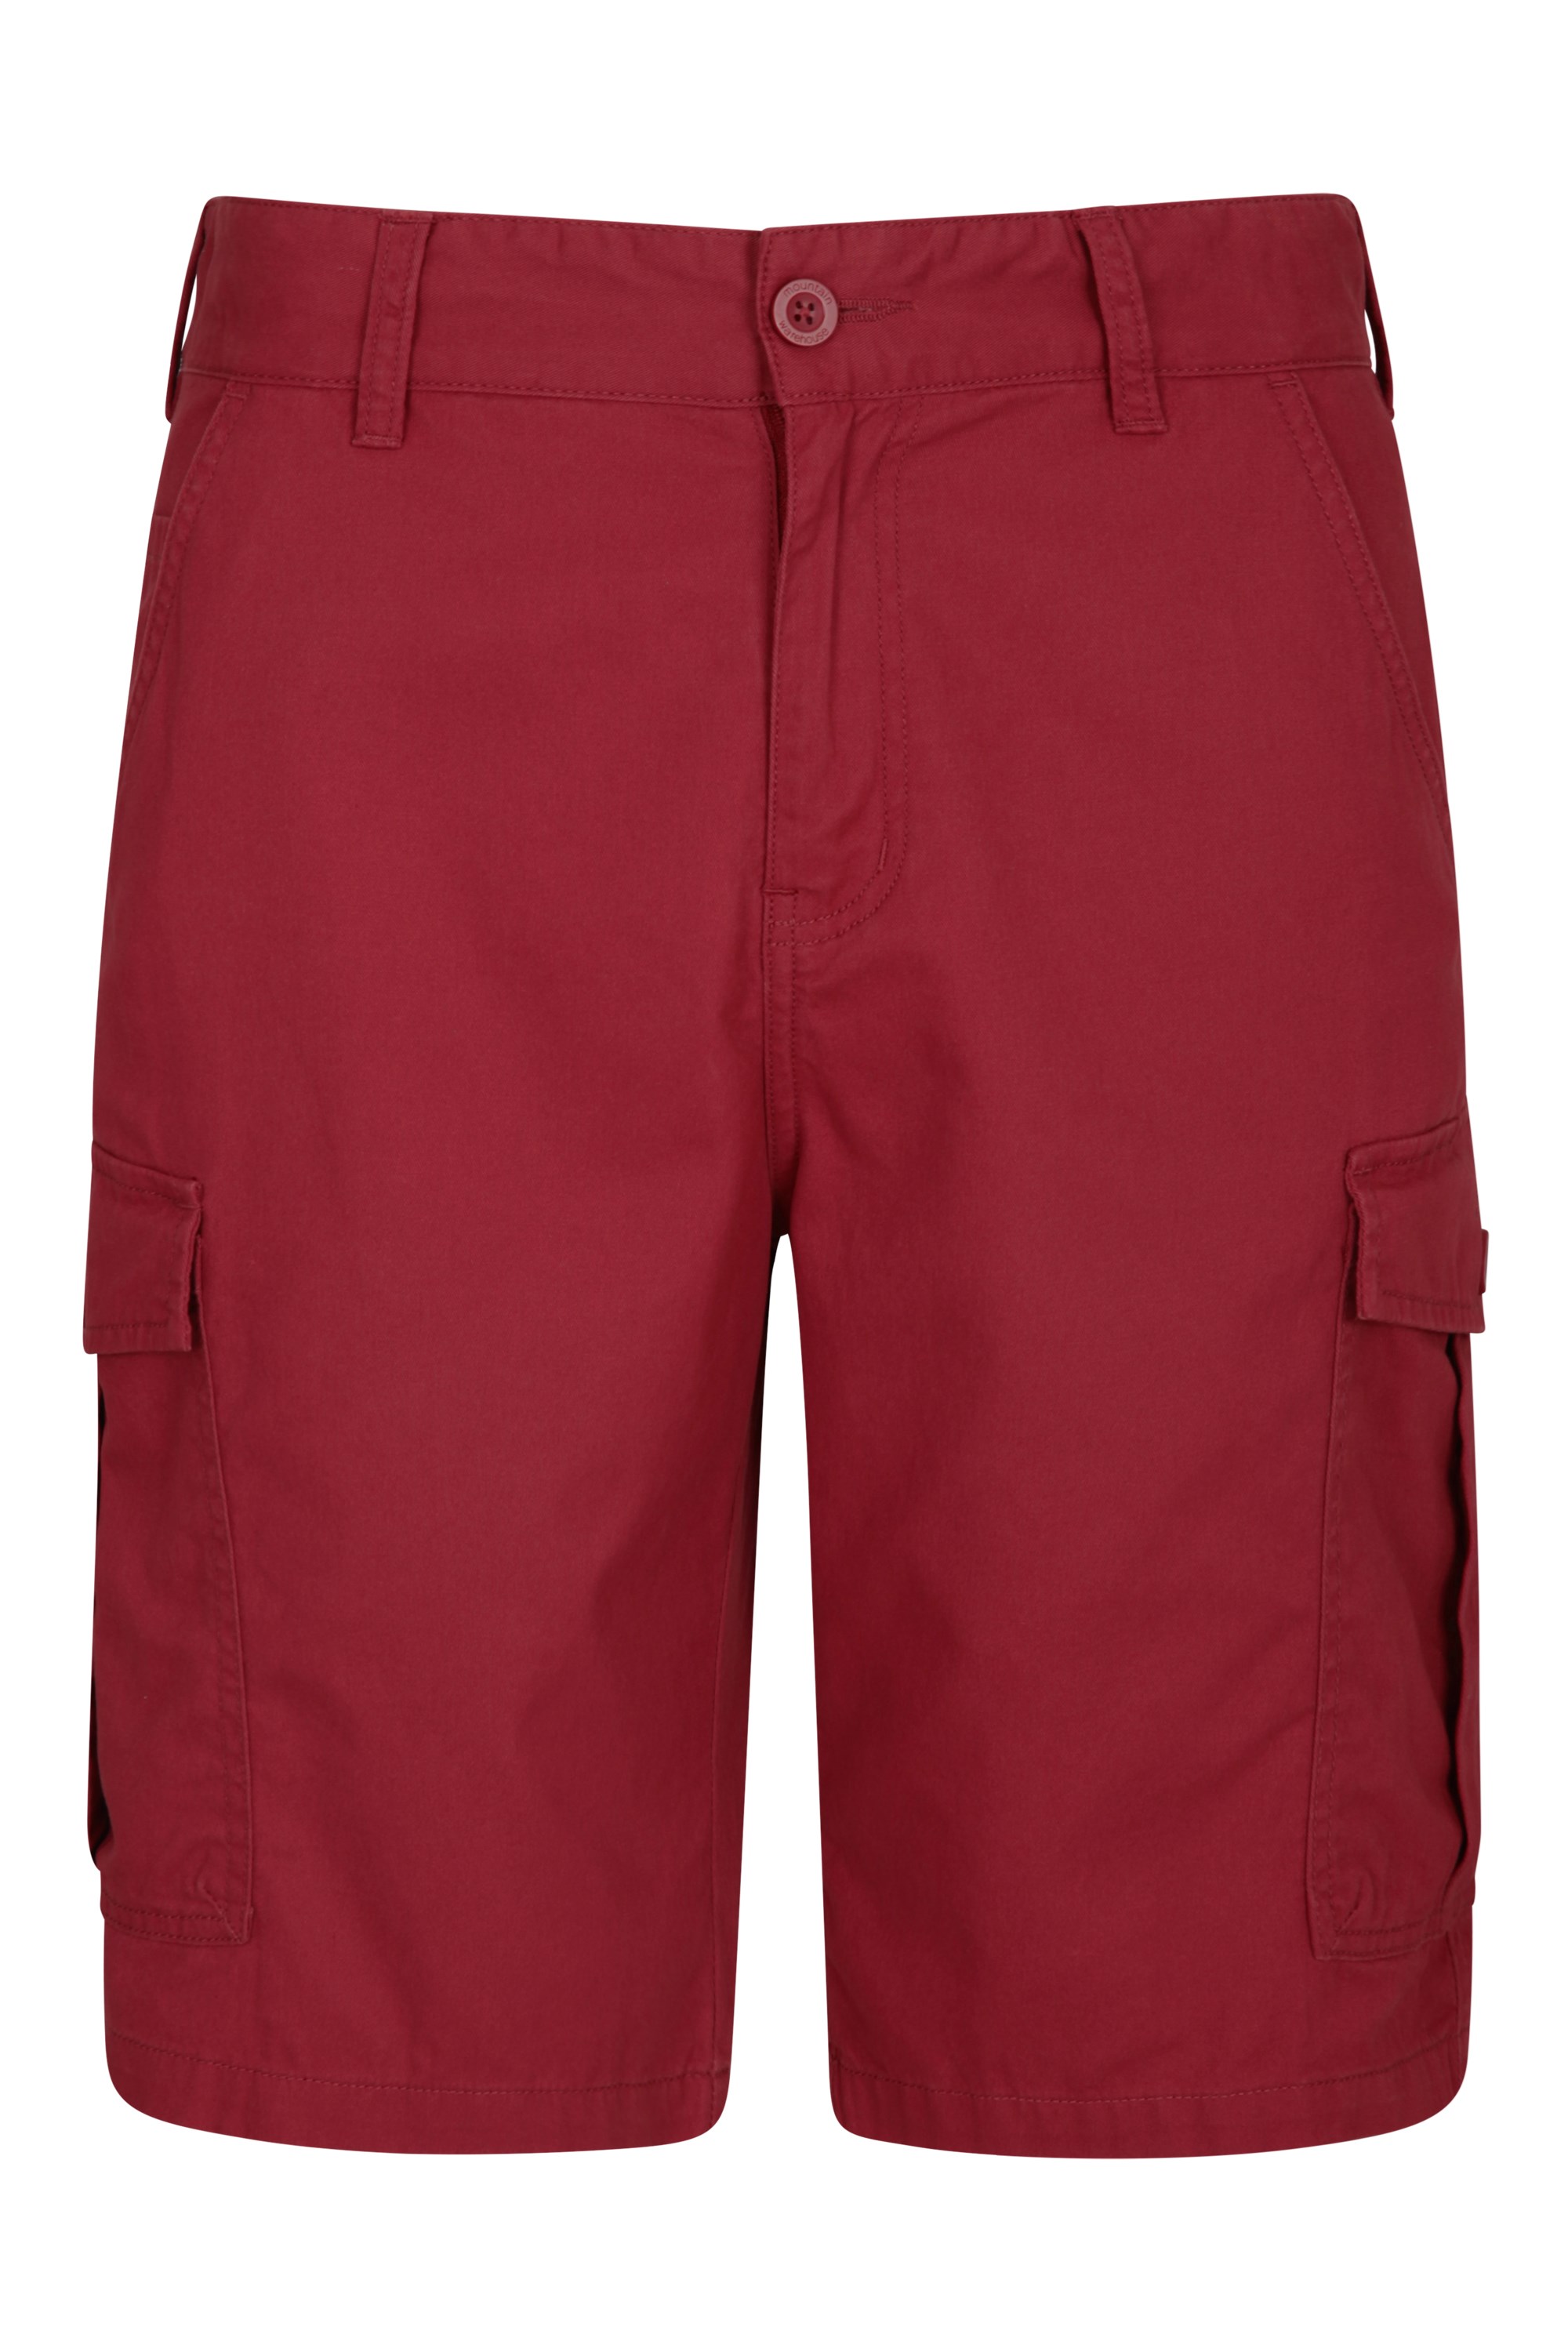 Lakeside Mens Cargo Shorts - Red